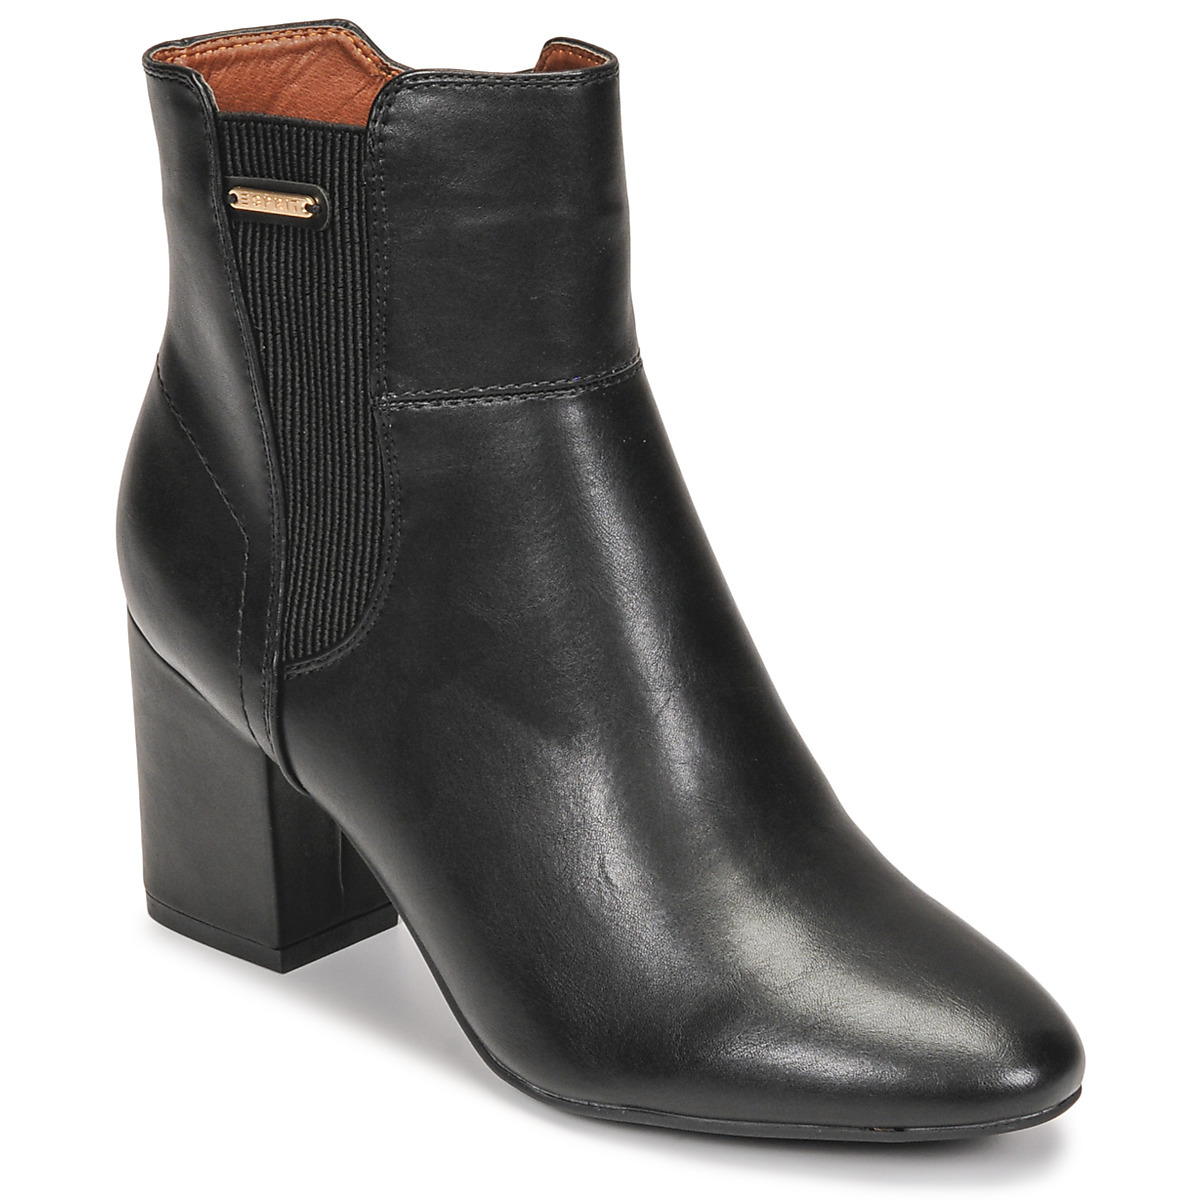 Esprit - Black Ankle Boots from Spartoo GOOFASH